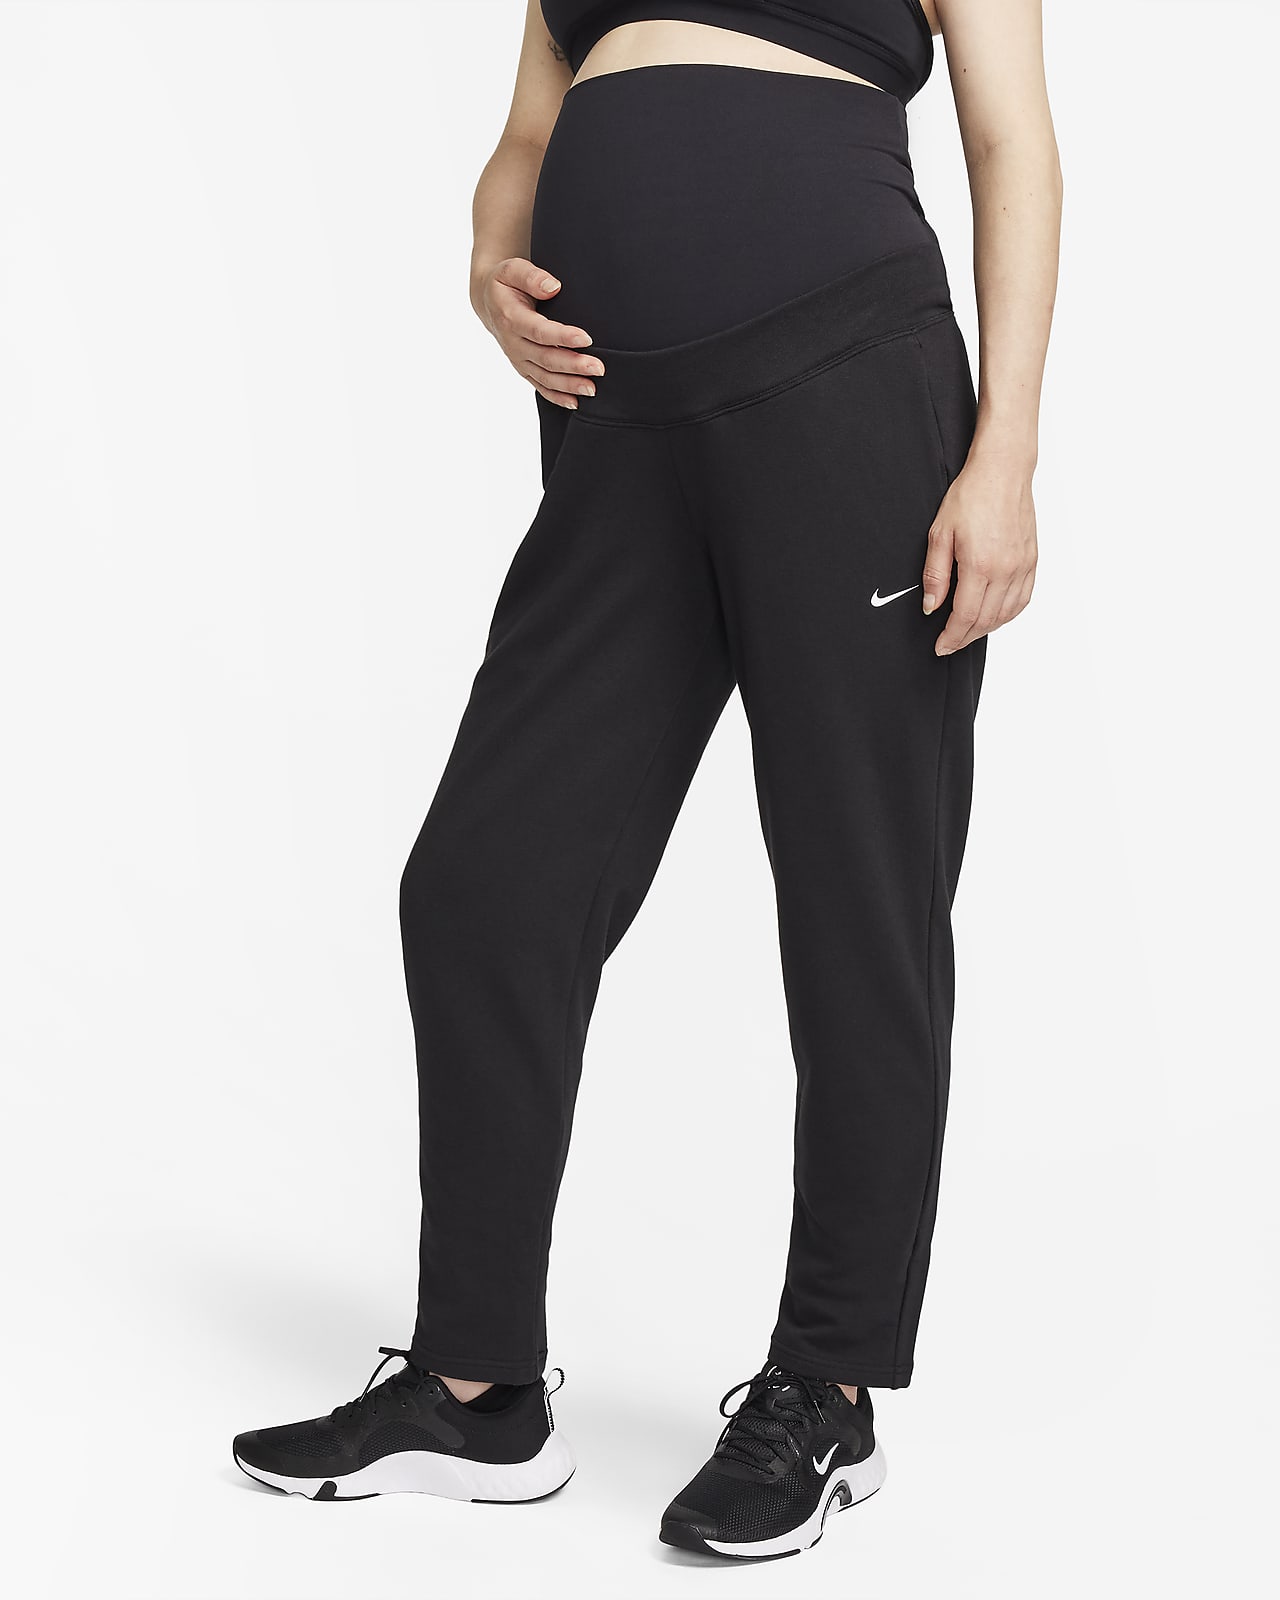 Pants de French Terry para mujer (maternidad) Nike One (M)